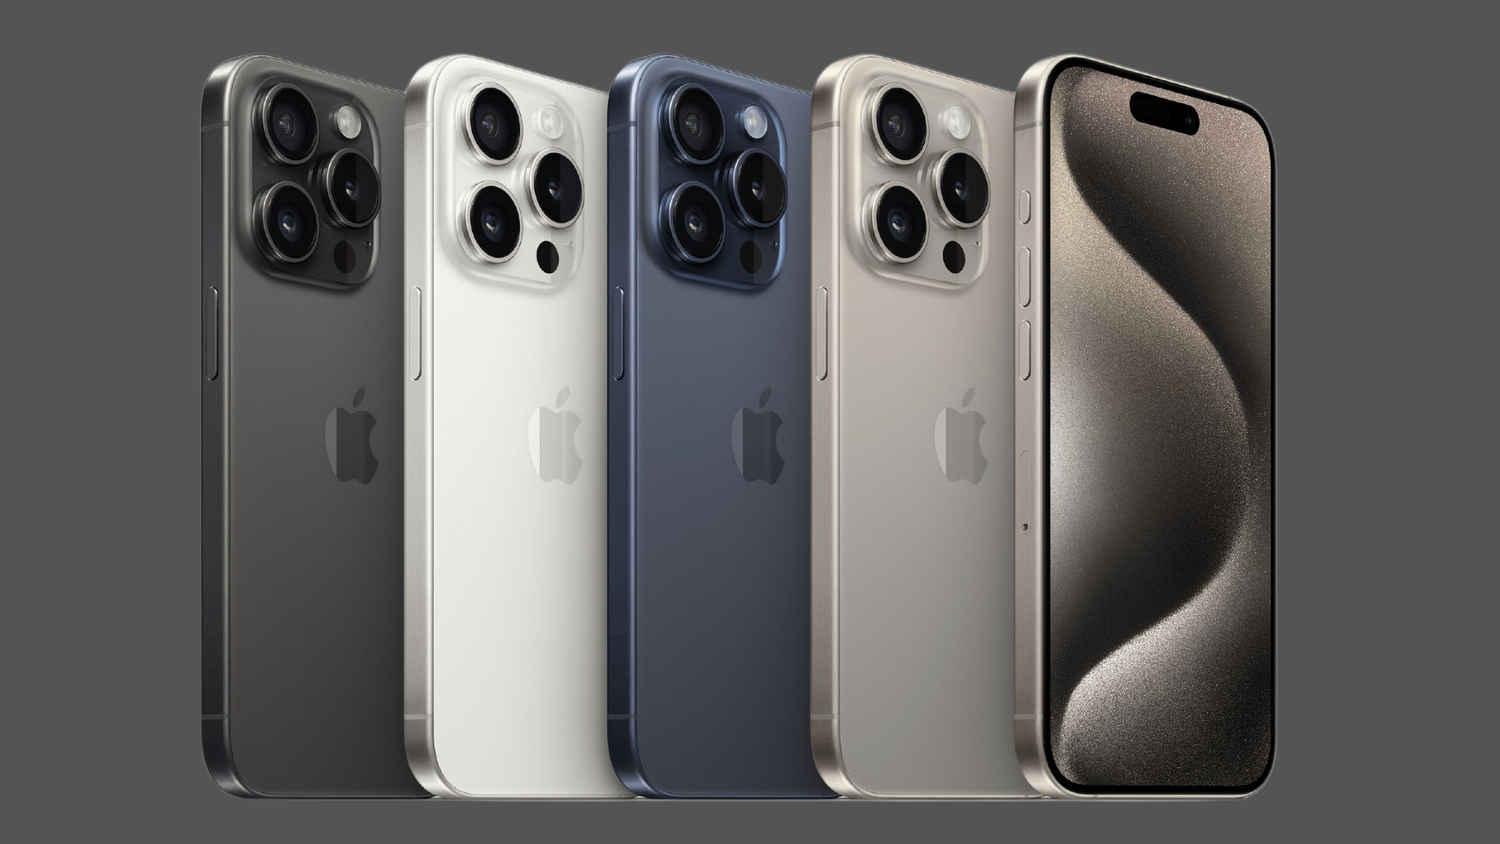 iPhone 16 Pro likely to launch in September with upgraded camera, display, and more